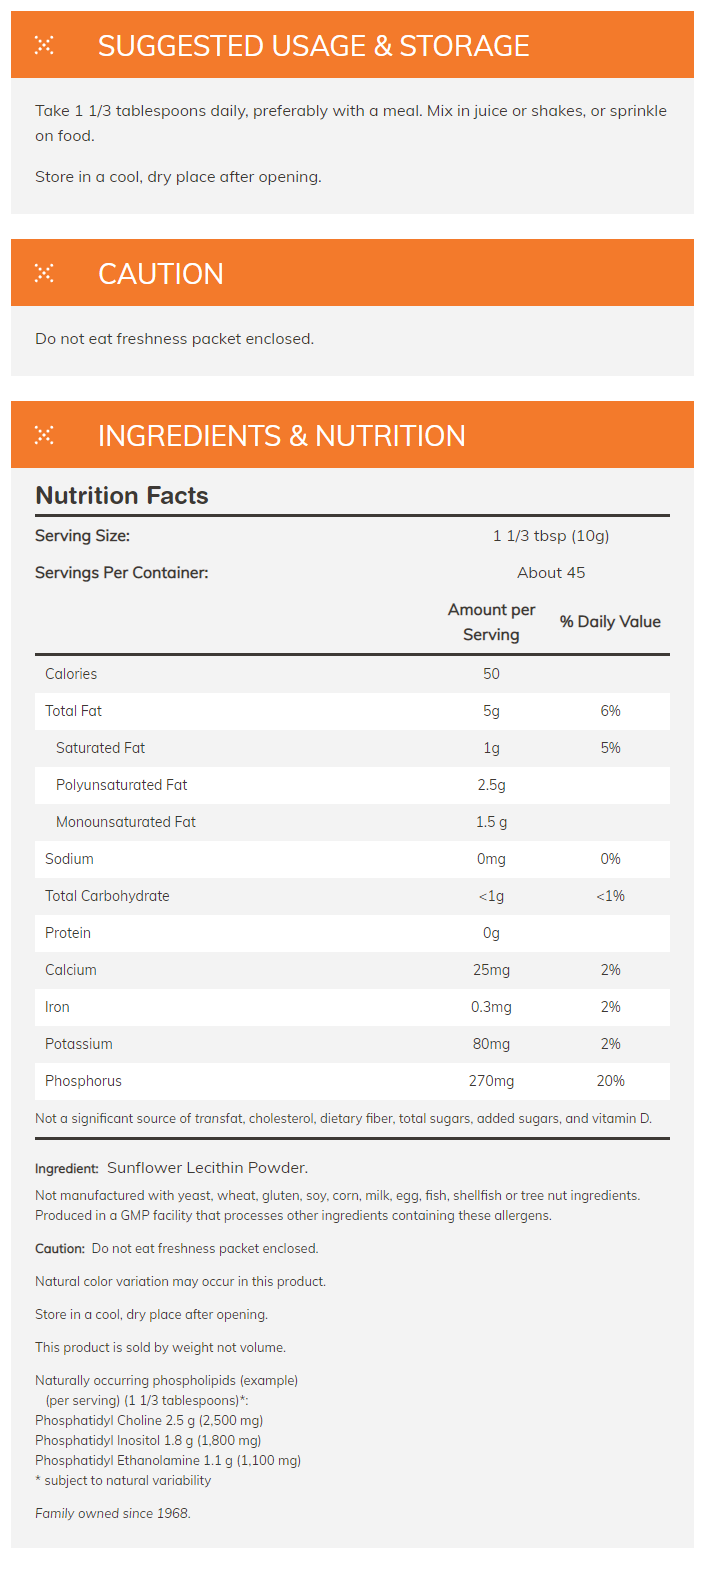 Sunflower Lecithin Powder nutrition facts and usage instructions. Free from common allergens, contains natural phospholipids. Family-owned since 1968.